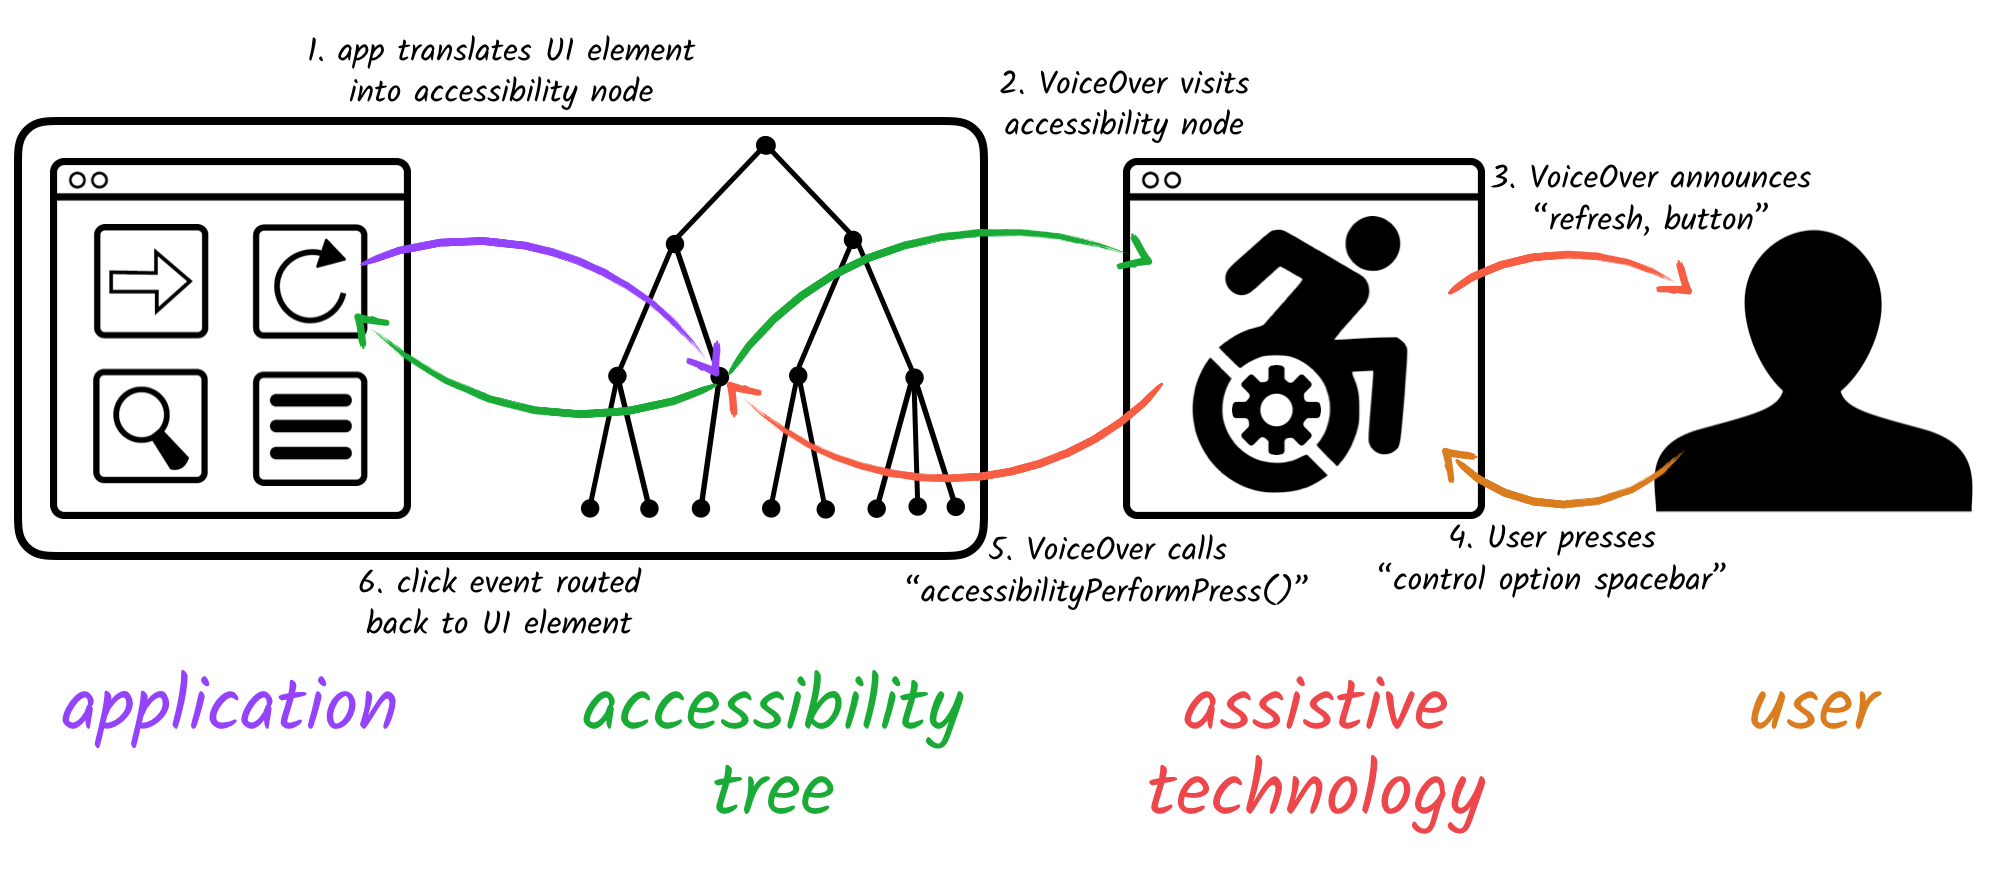 A full round trip from UI element to accessibility node to assistive technology to user to user keypress to accessibility API action method back to UI element